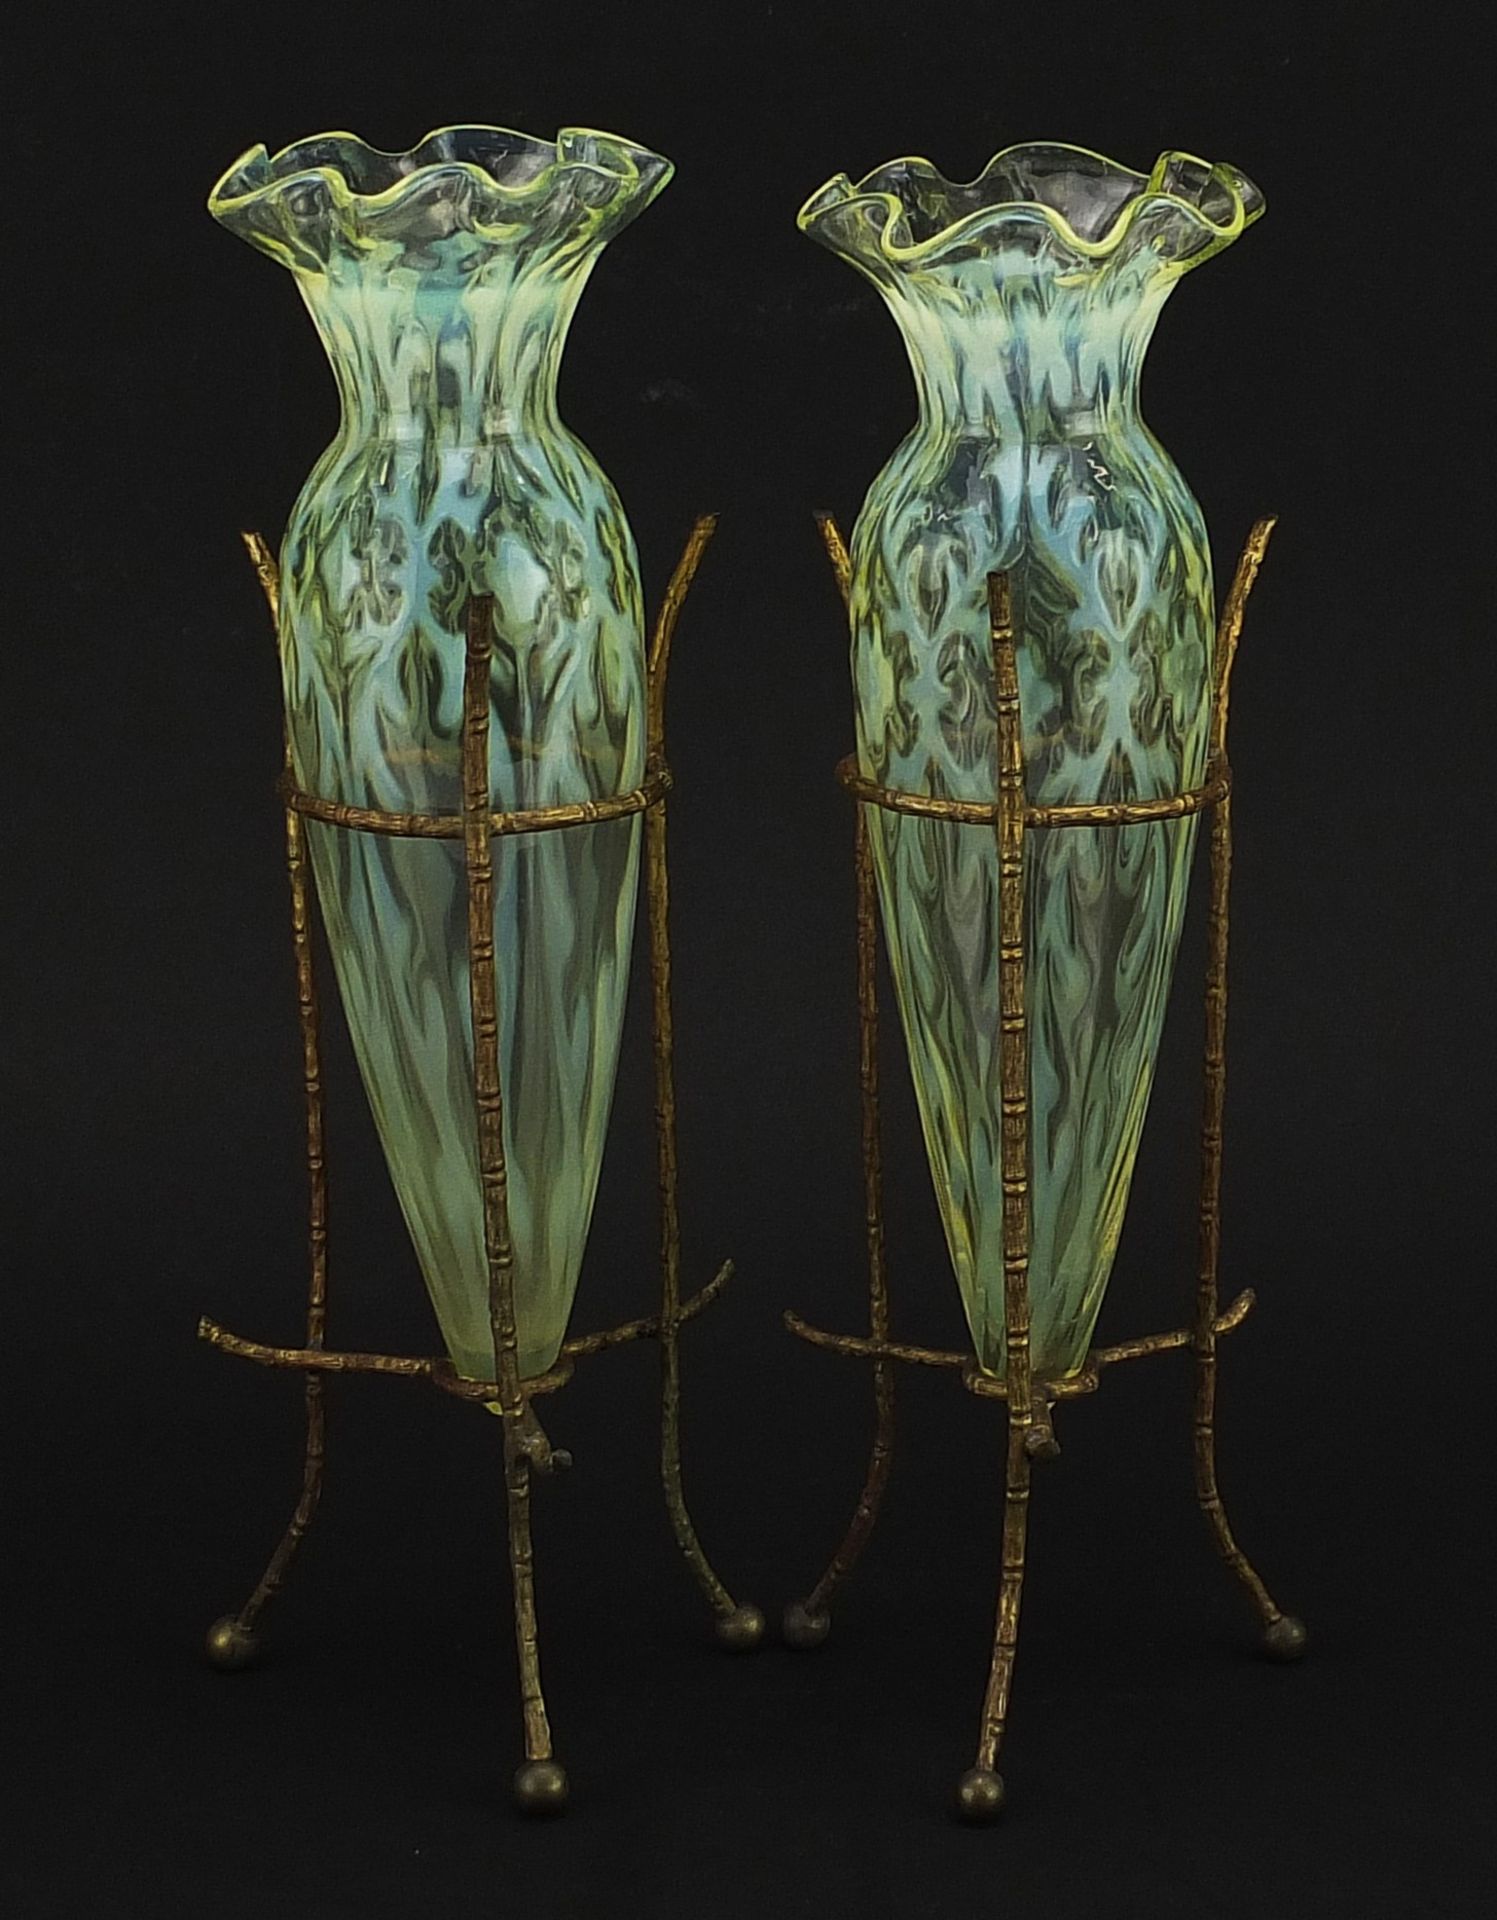 Attributed to James Powell & Sons, pair of Arts & Crafts Vaseline glass vases housed in gilt metal - Image 2 of 6